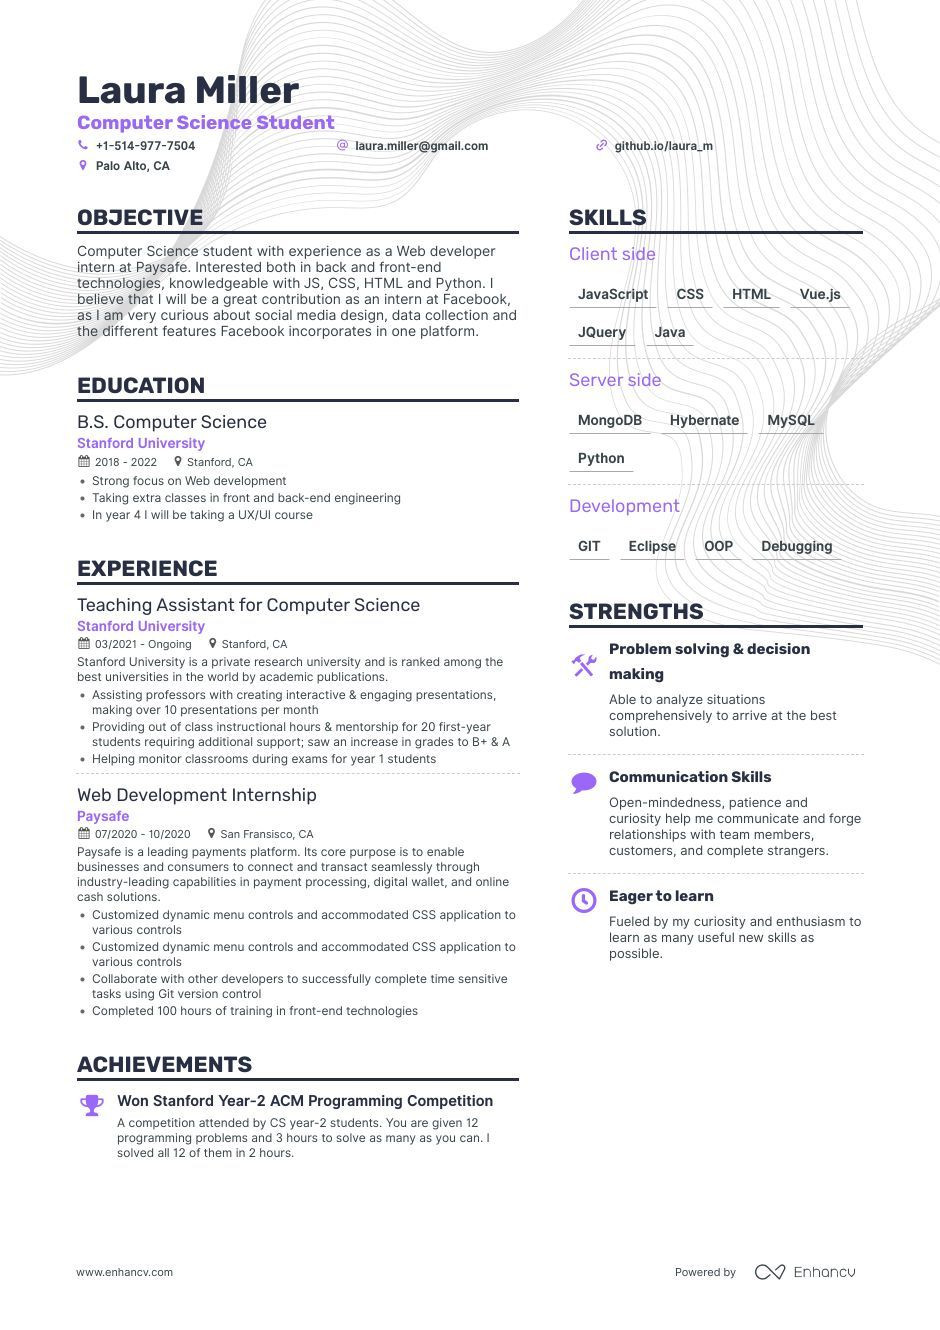 Sample Resume Objectives for Computer Technology Computer Science Resume Examples & Guide for 2022 (layout, Skills …